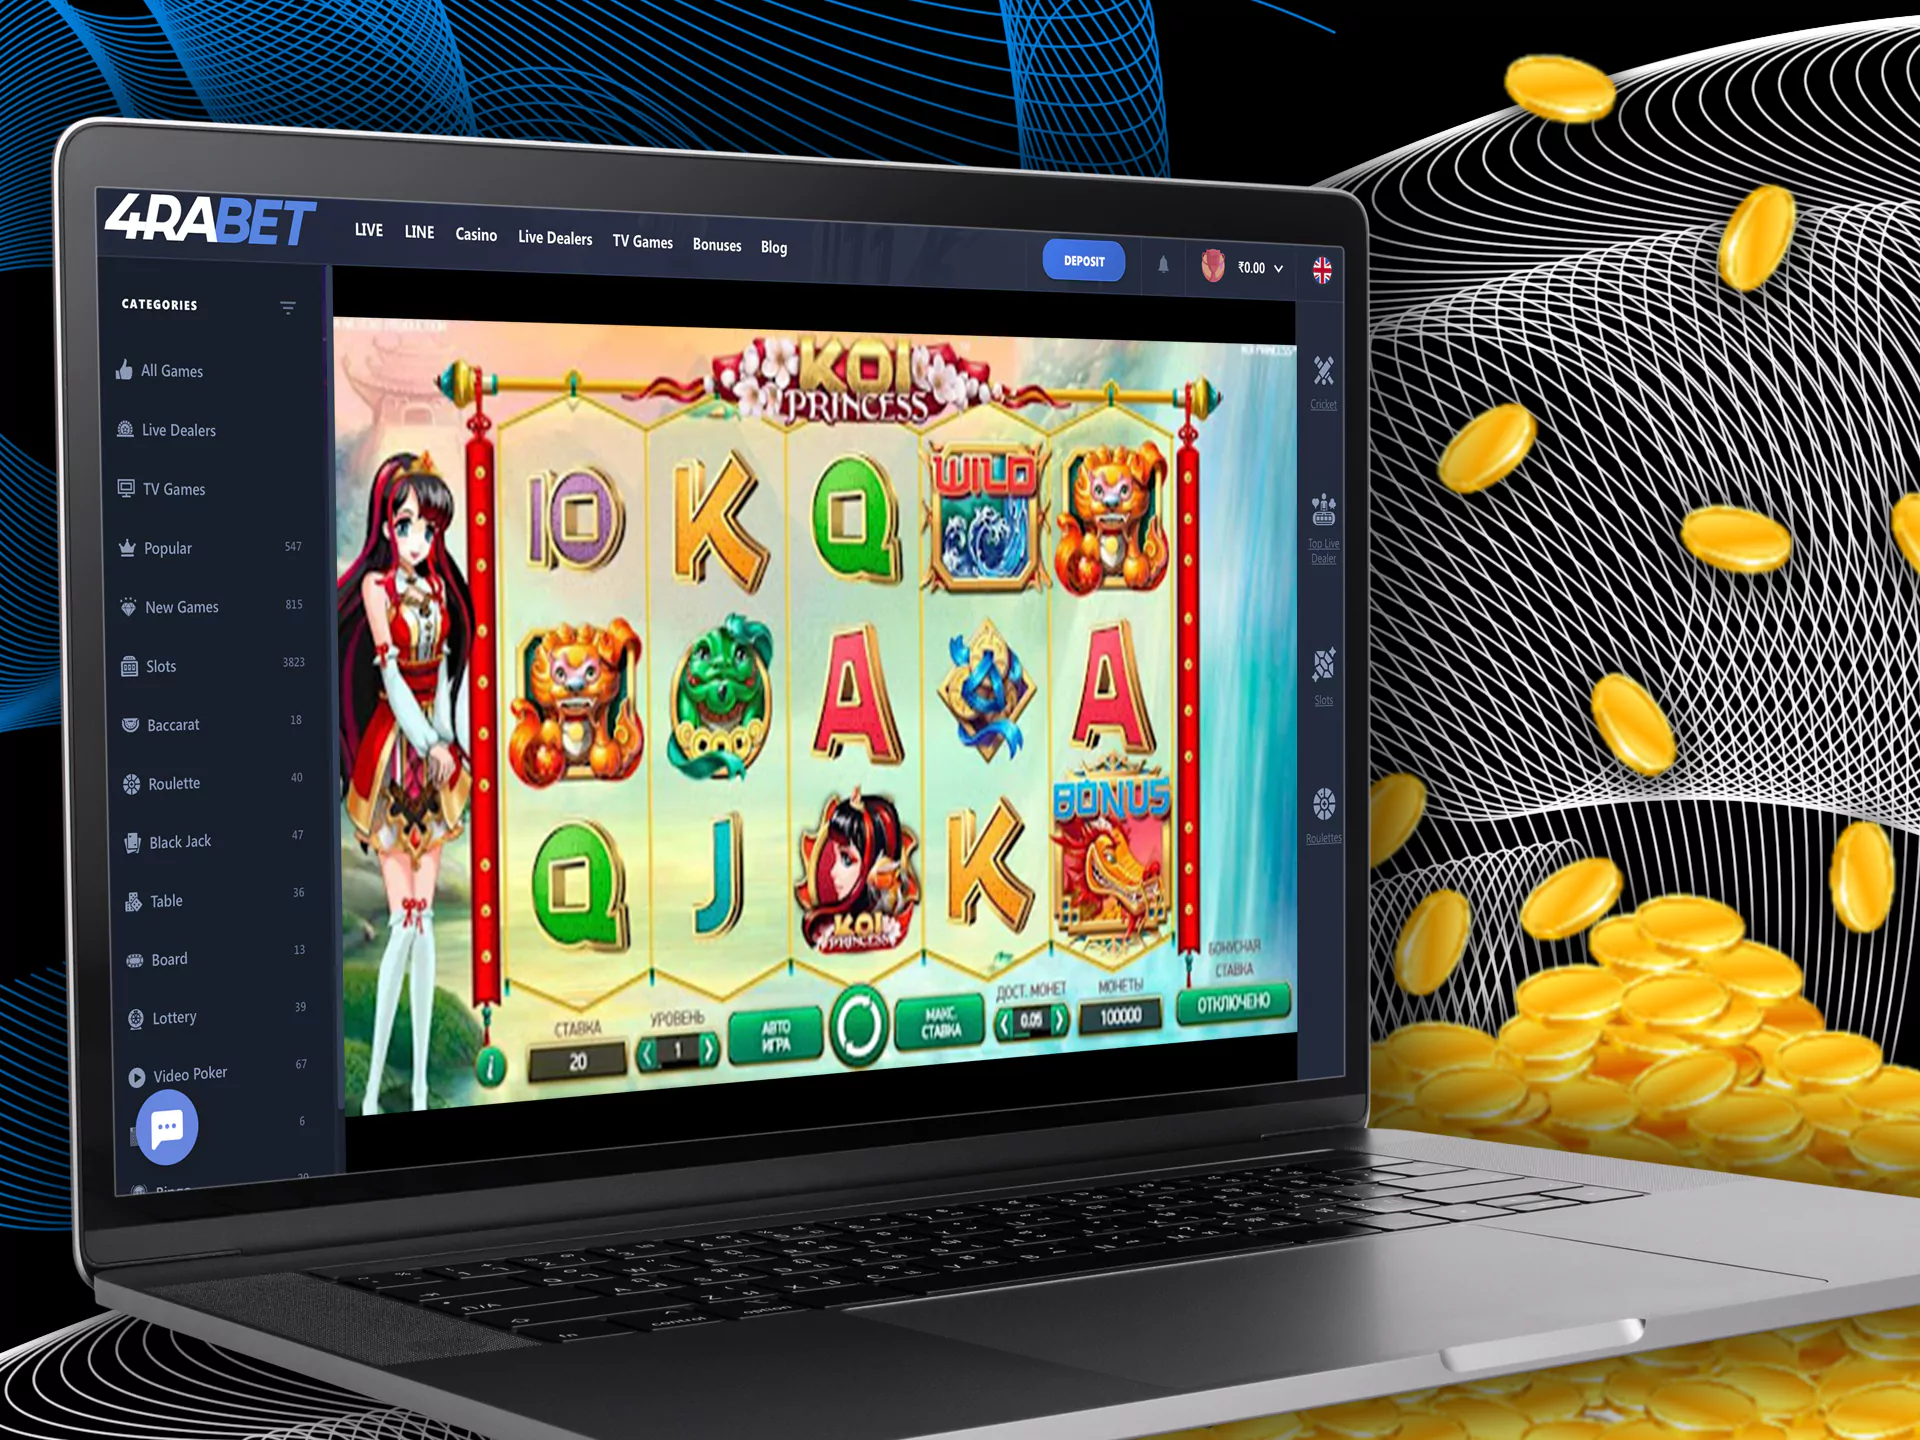 Koi Princess — one of the most best Casino game at 4rabet Bookie.